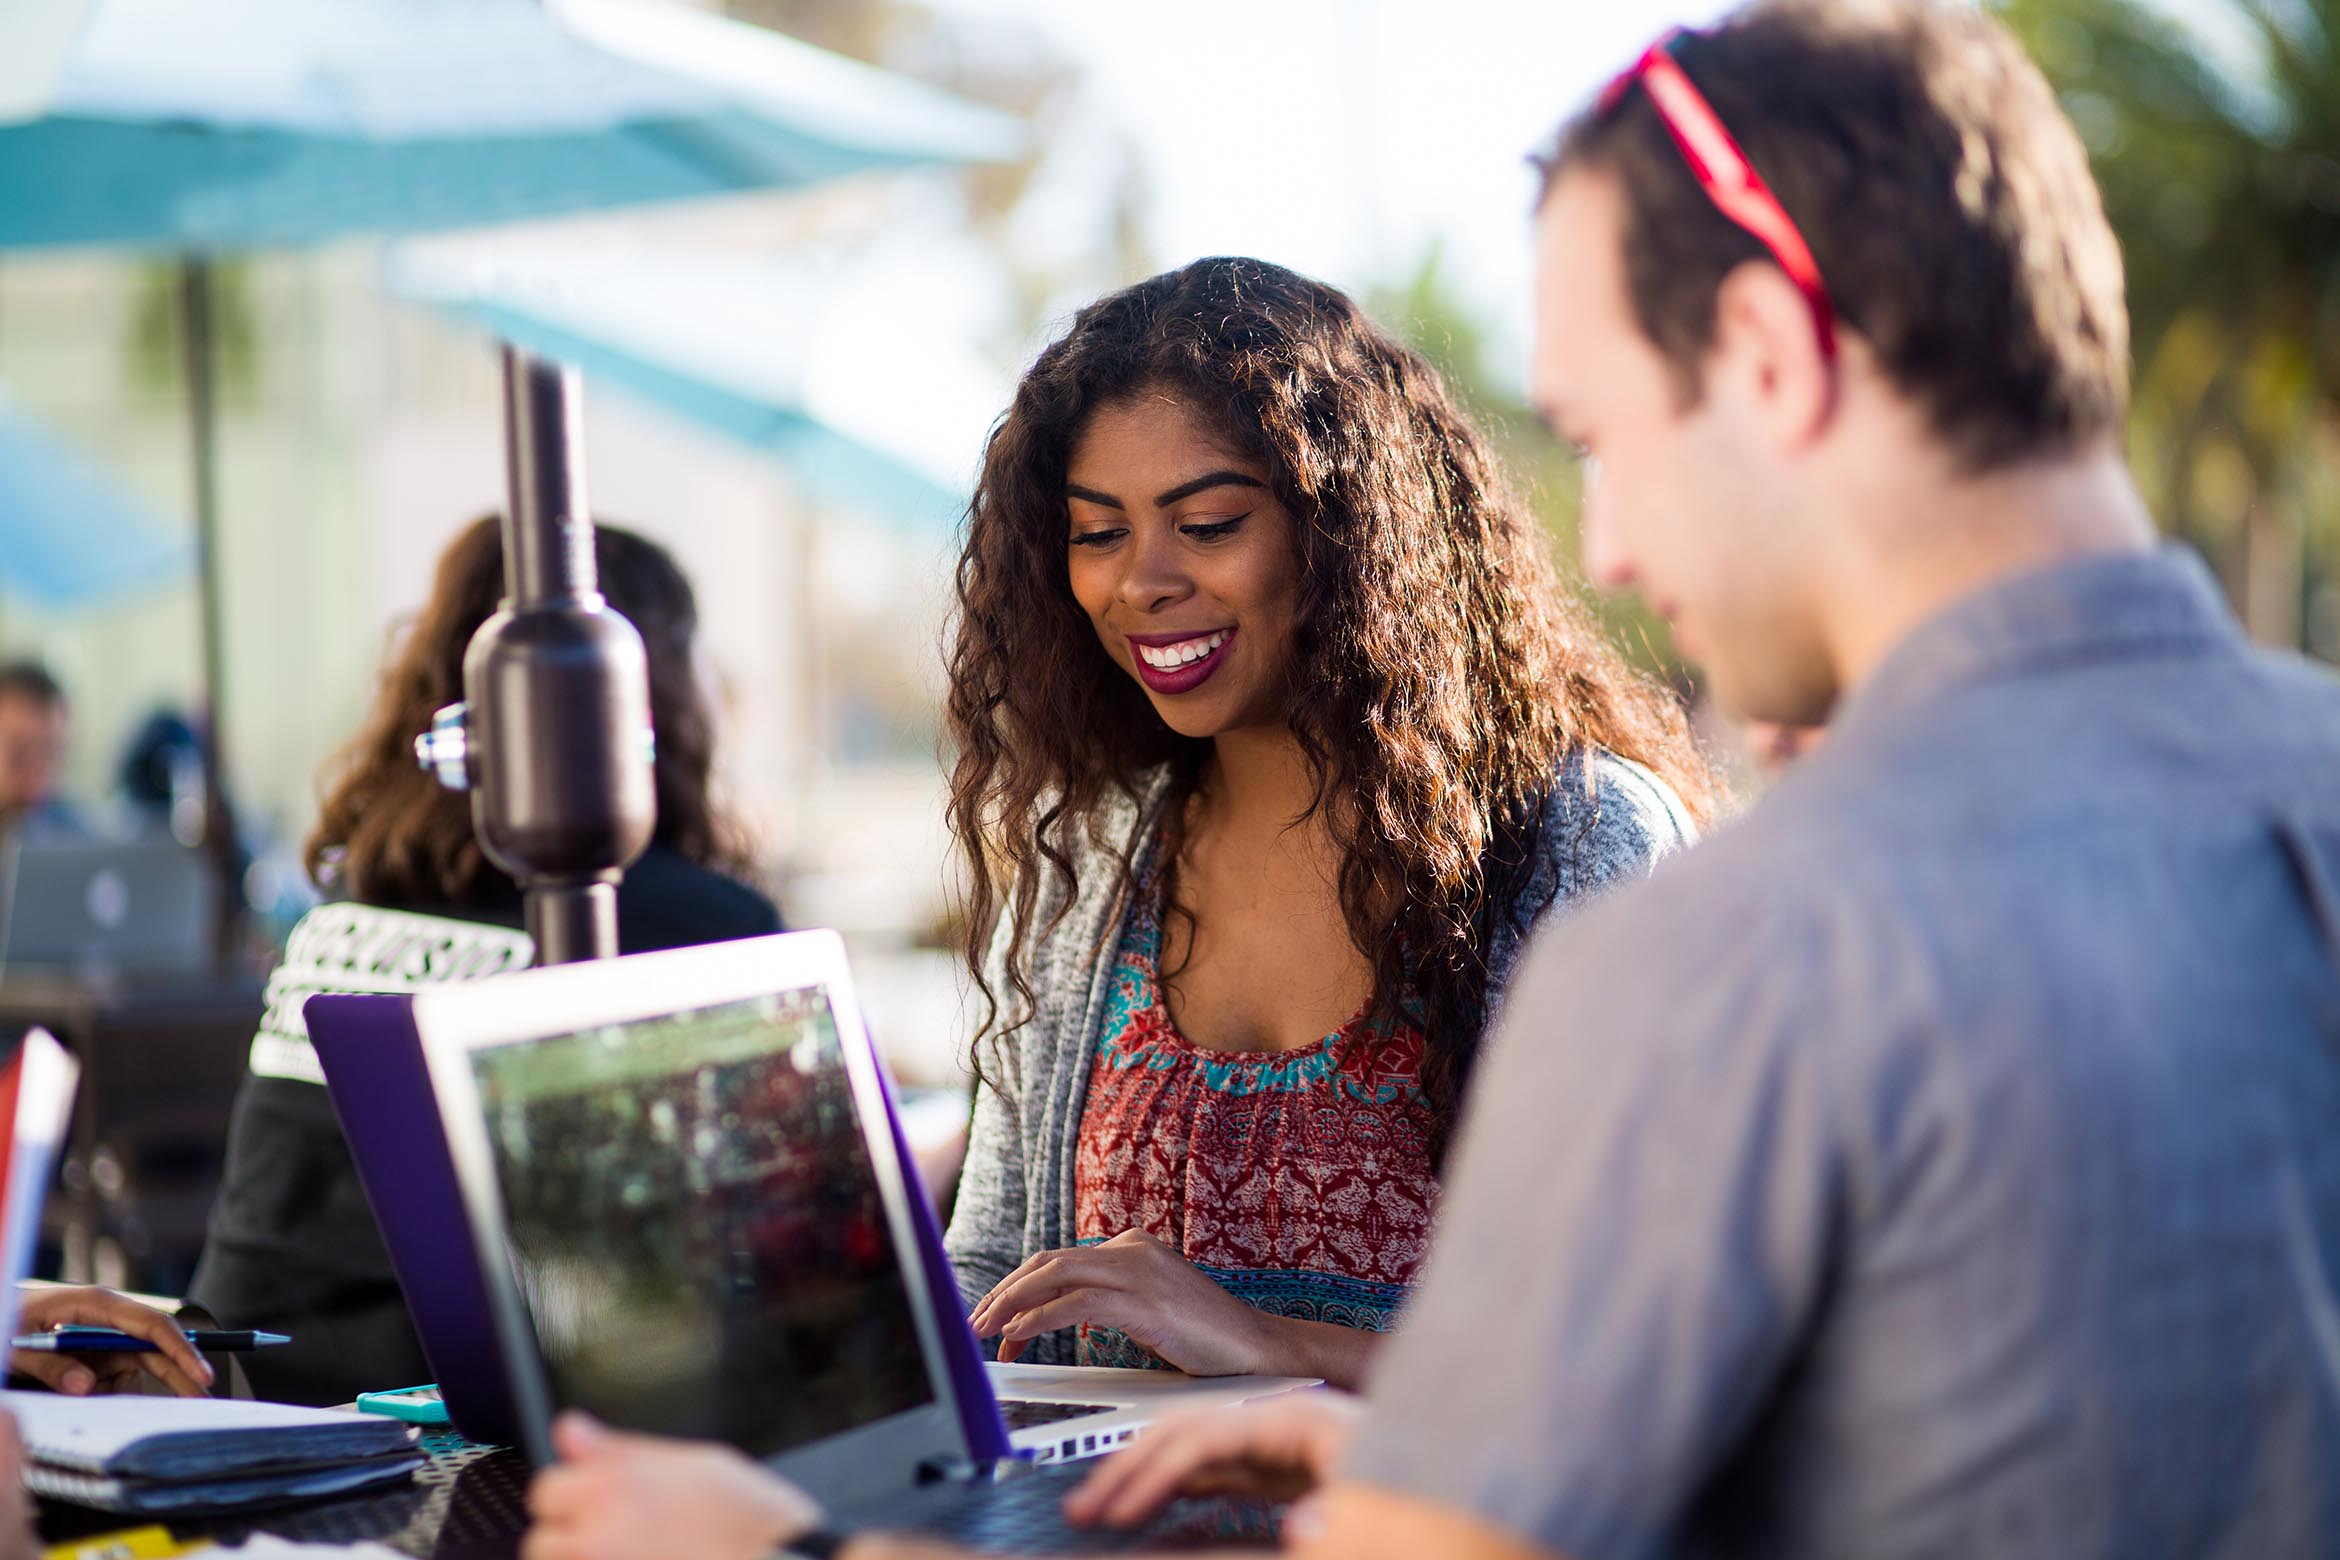 Two students smile while working outdoors on their laptops.